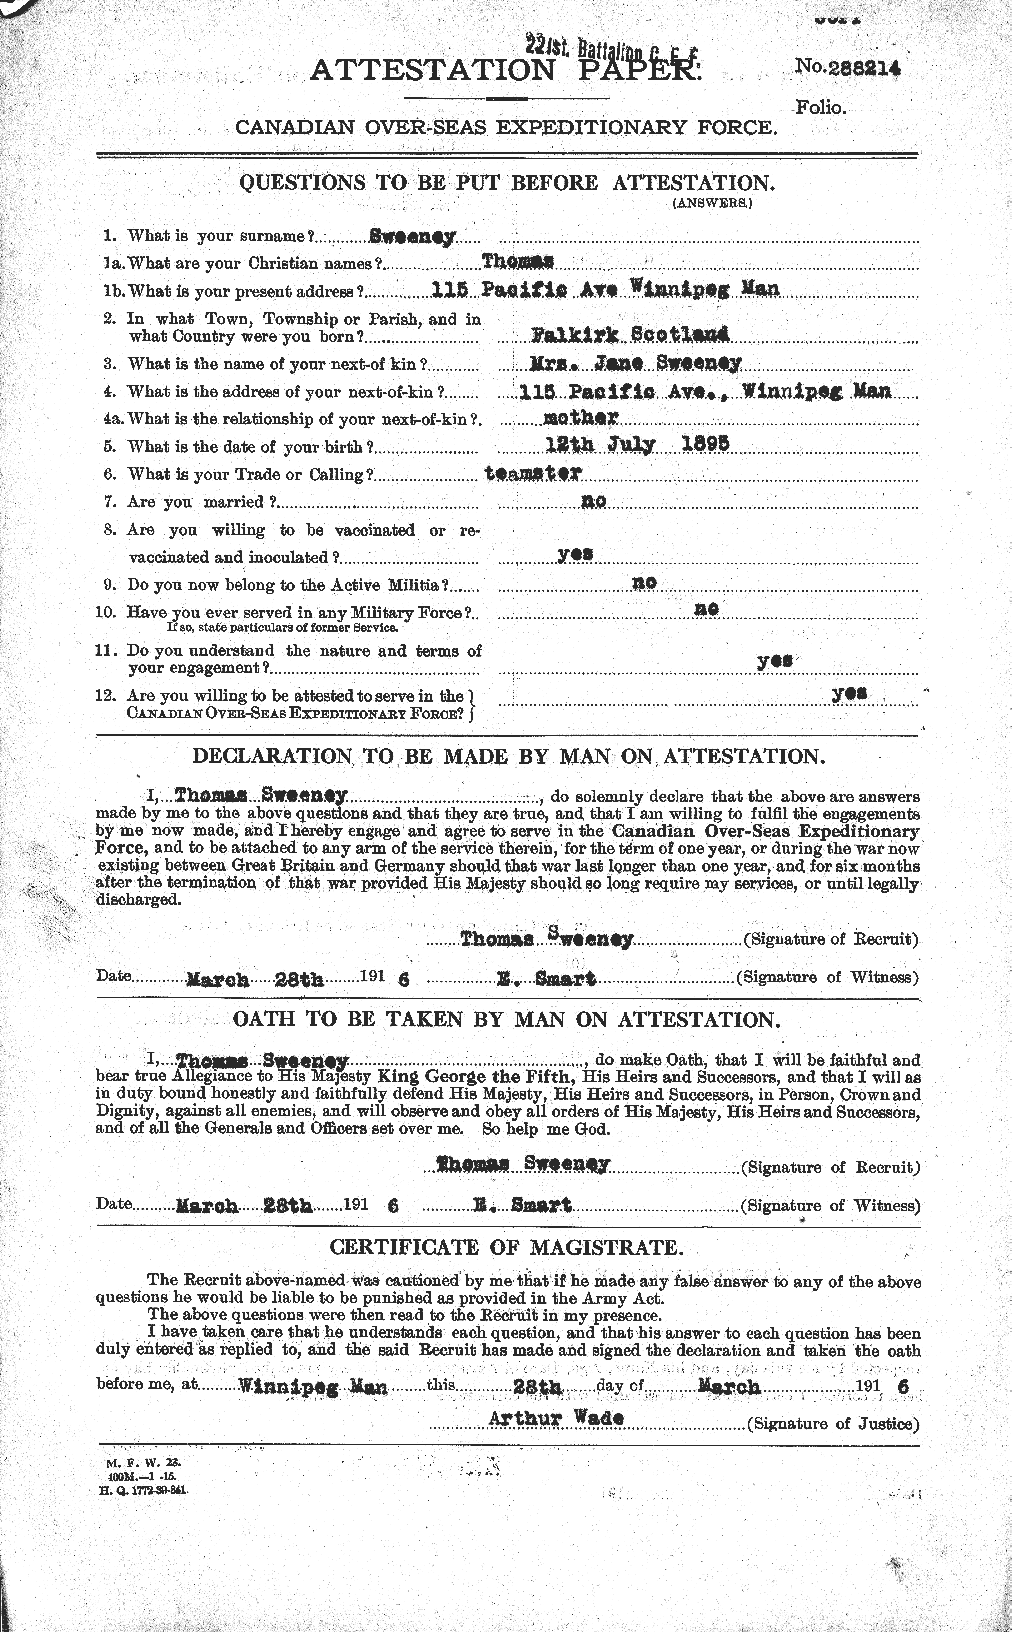 Personnel Records of the First World War - CEF 129513a